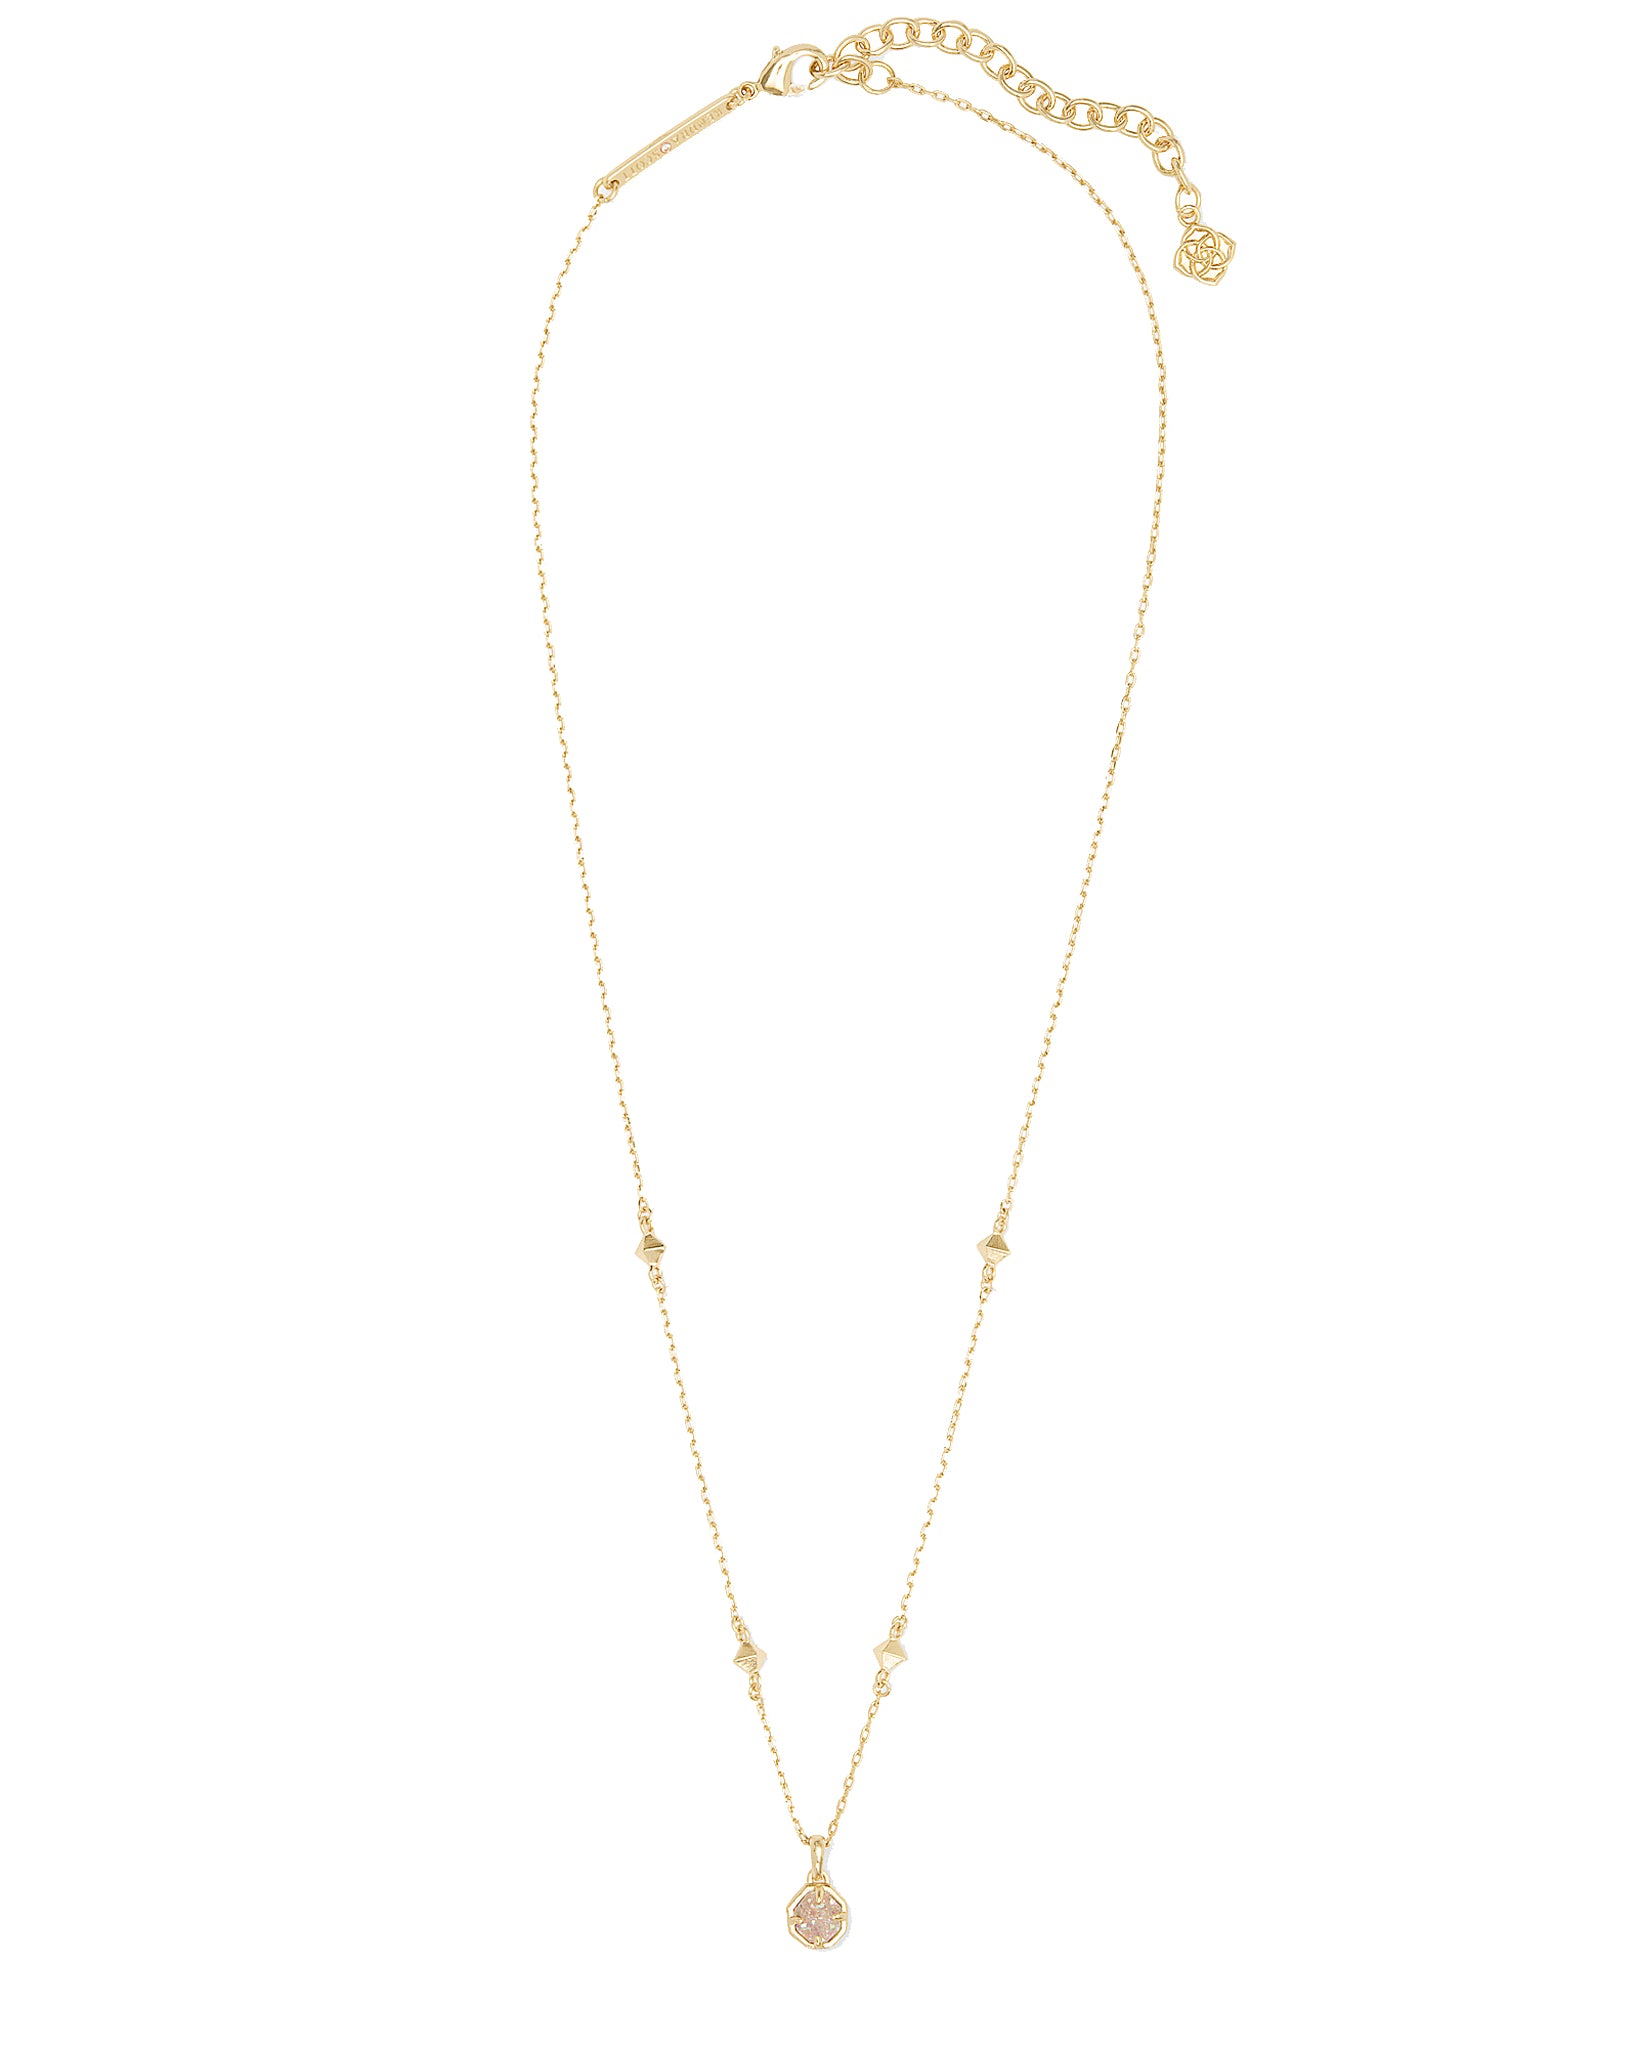 Kendra Scott Nola Pendant Necklace in Iridescent Drusy and Gold